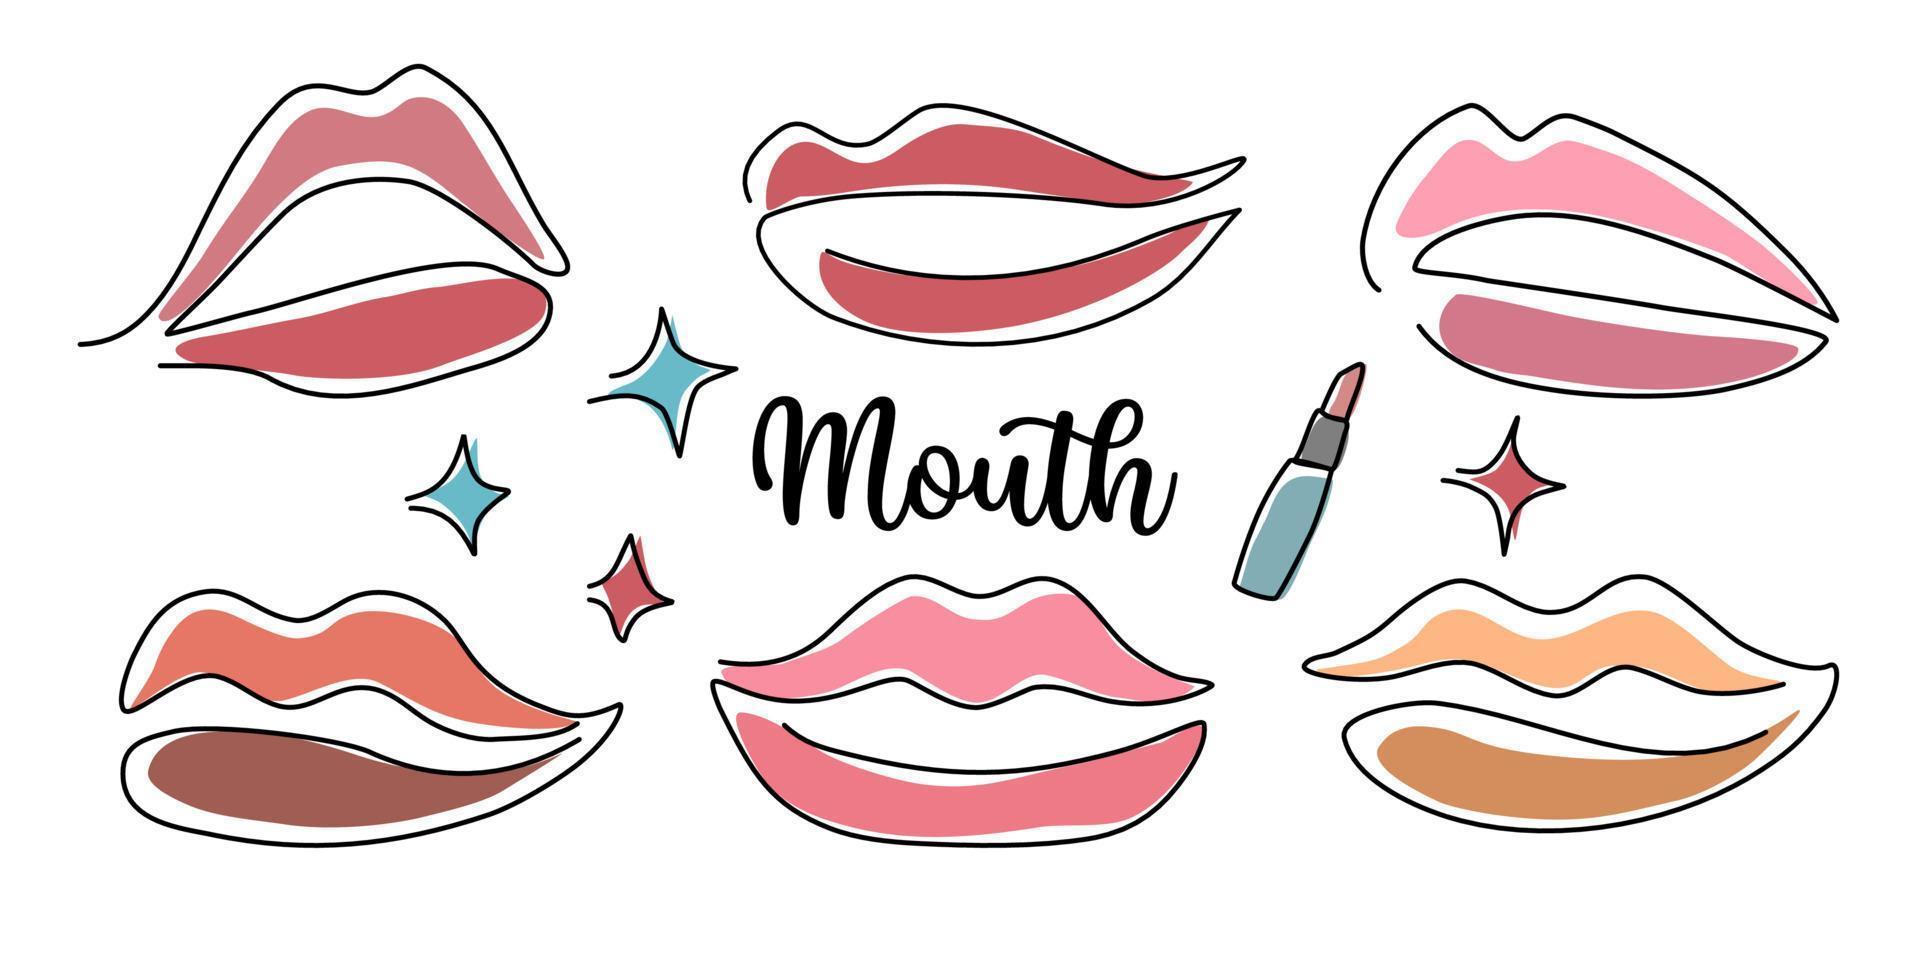 Mouth vector illustration Doodle style design for fashion, decoration, cards, beauty salons, backgrounds, digital prints, stickers and more.